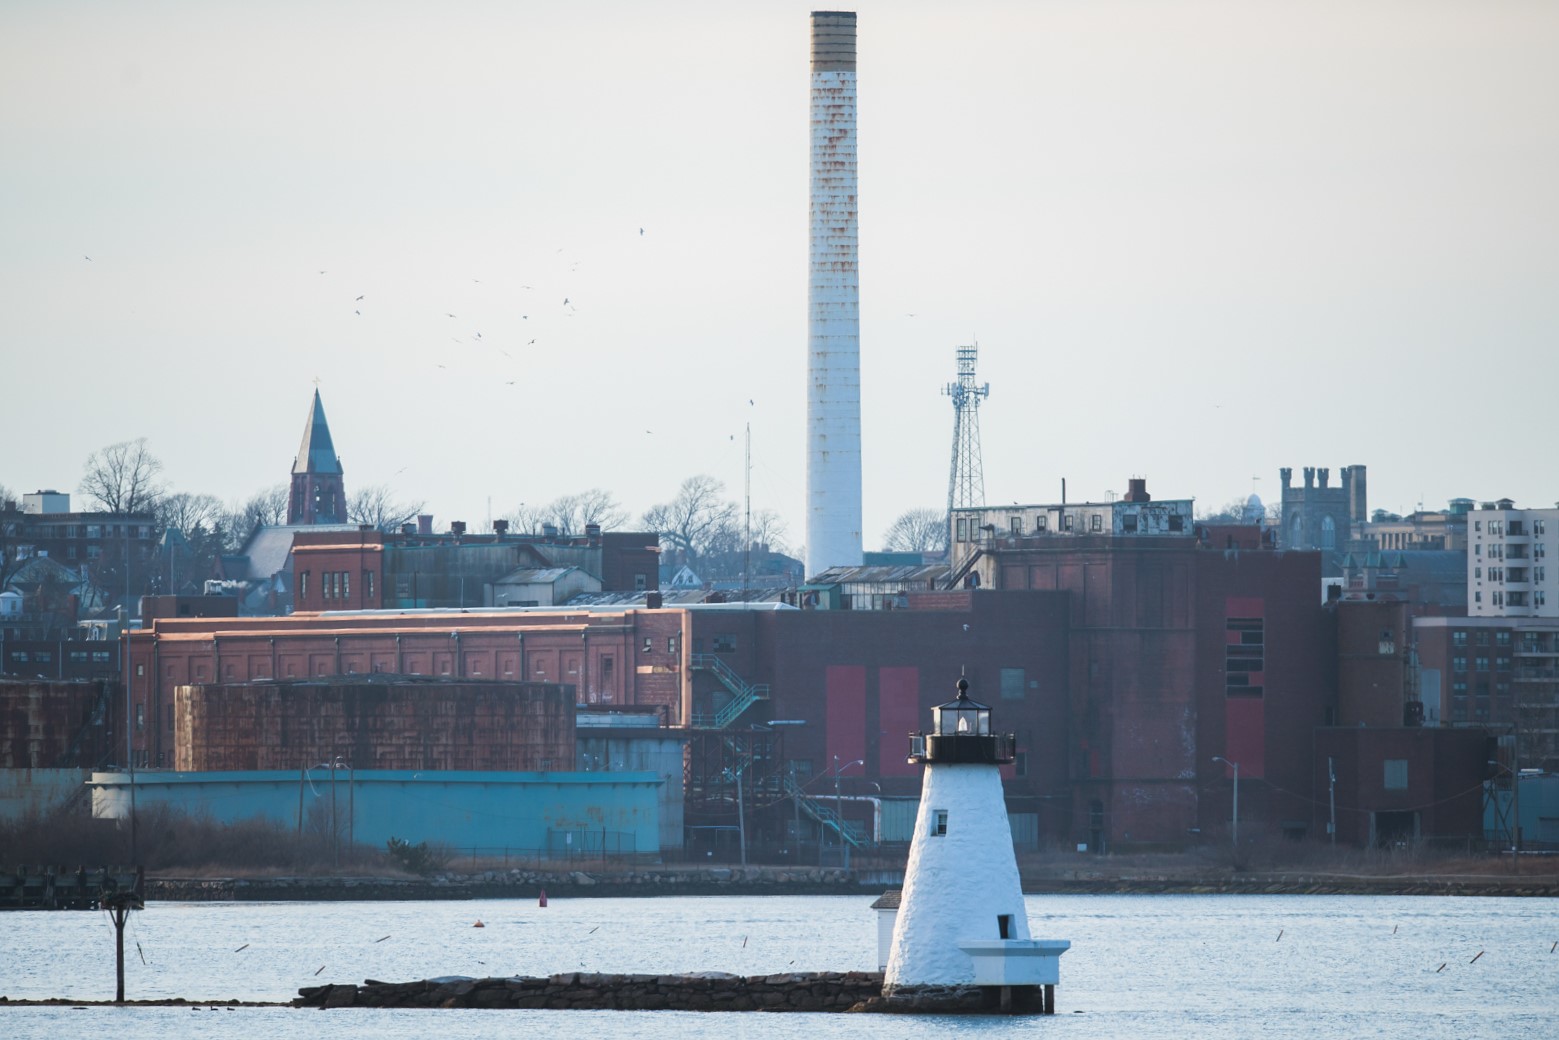 The EPA has spent close to $1 billion removing PCBs from the bottom of New Bedford's harbor.